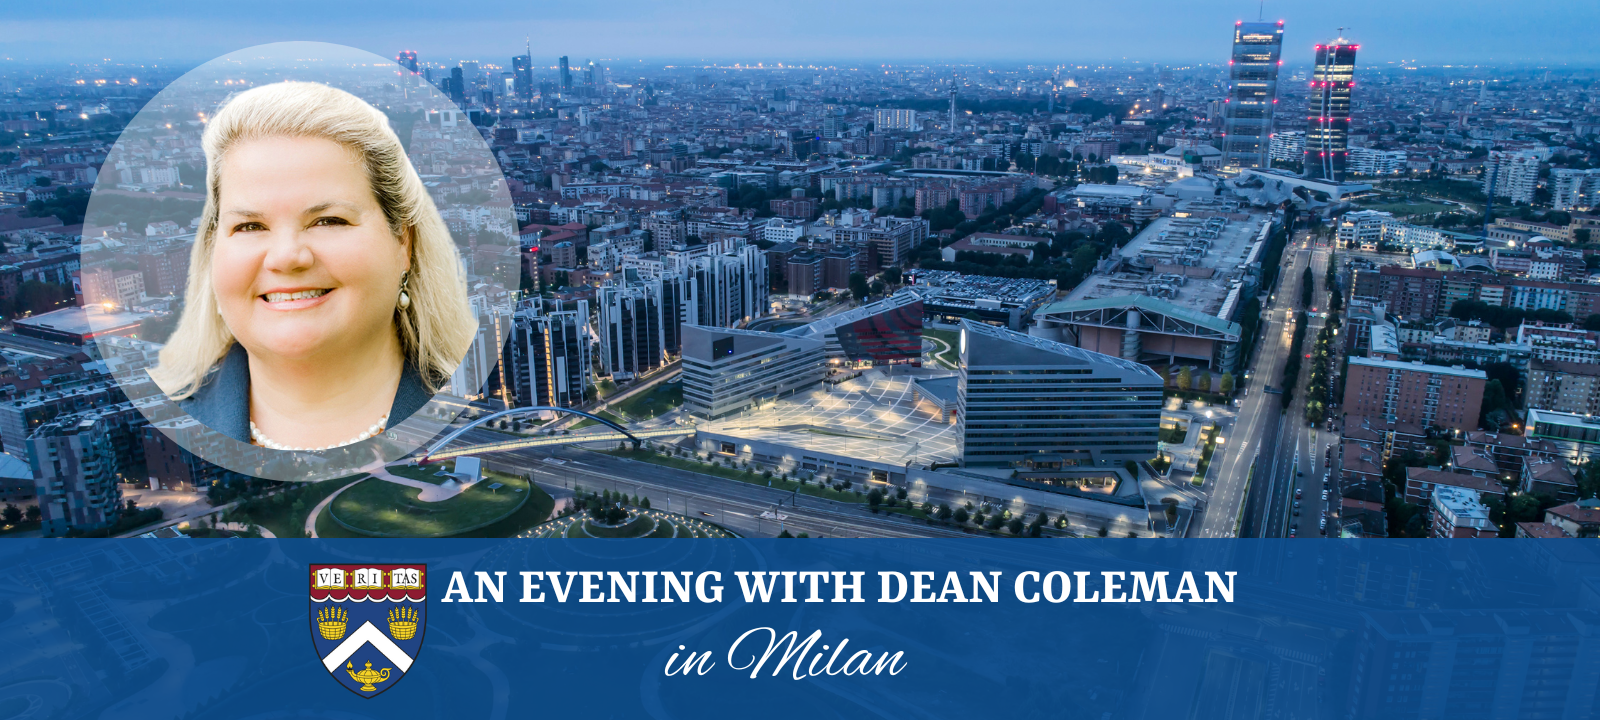 An Evening with Dean Coleman in Milan